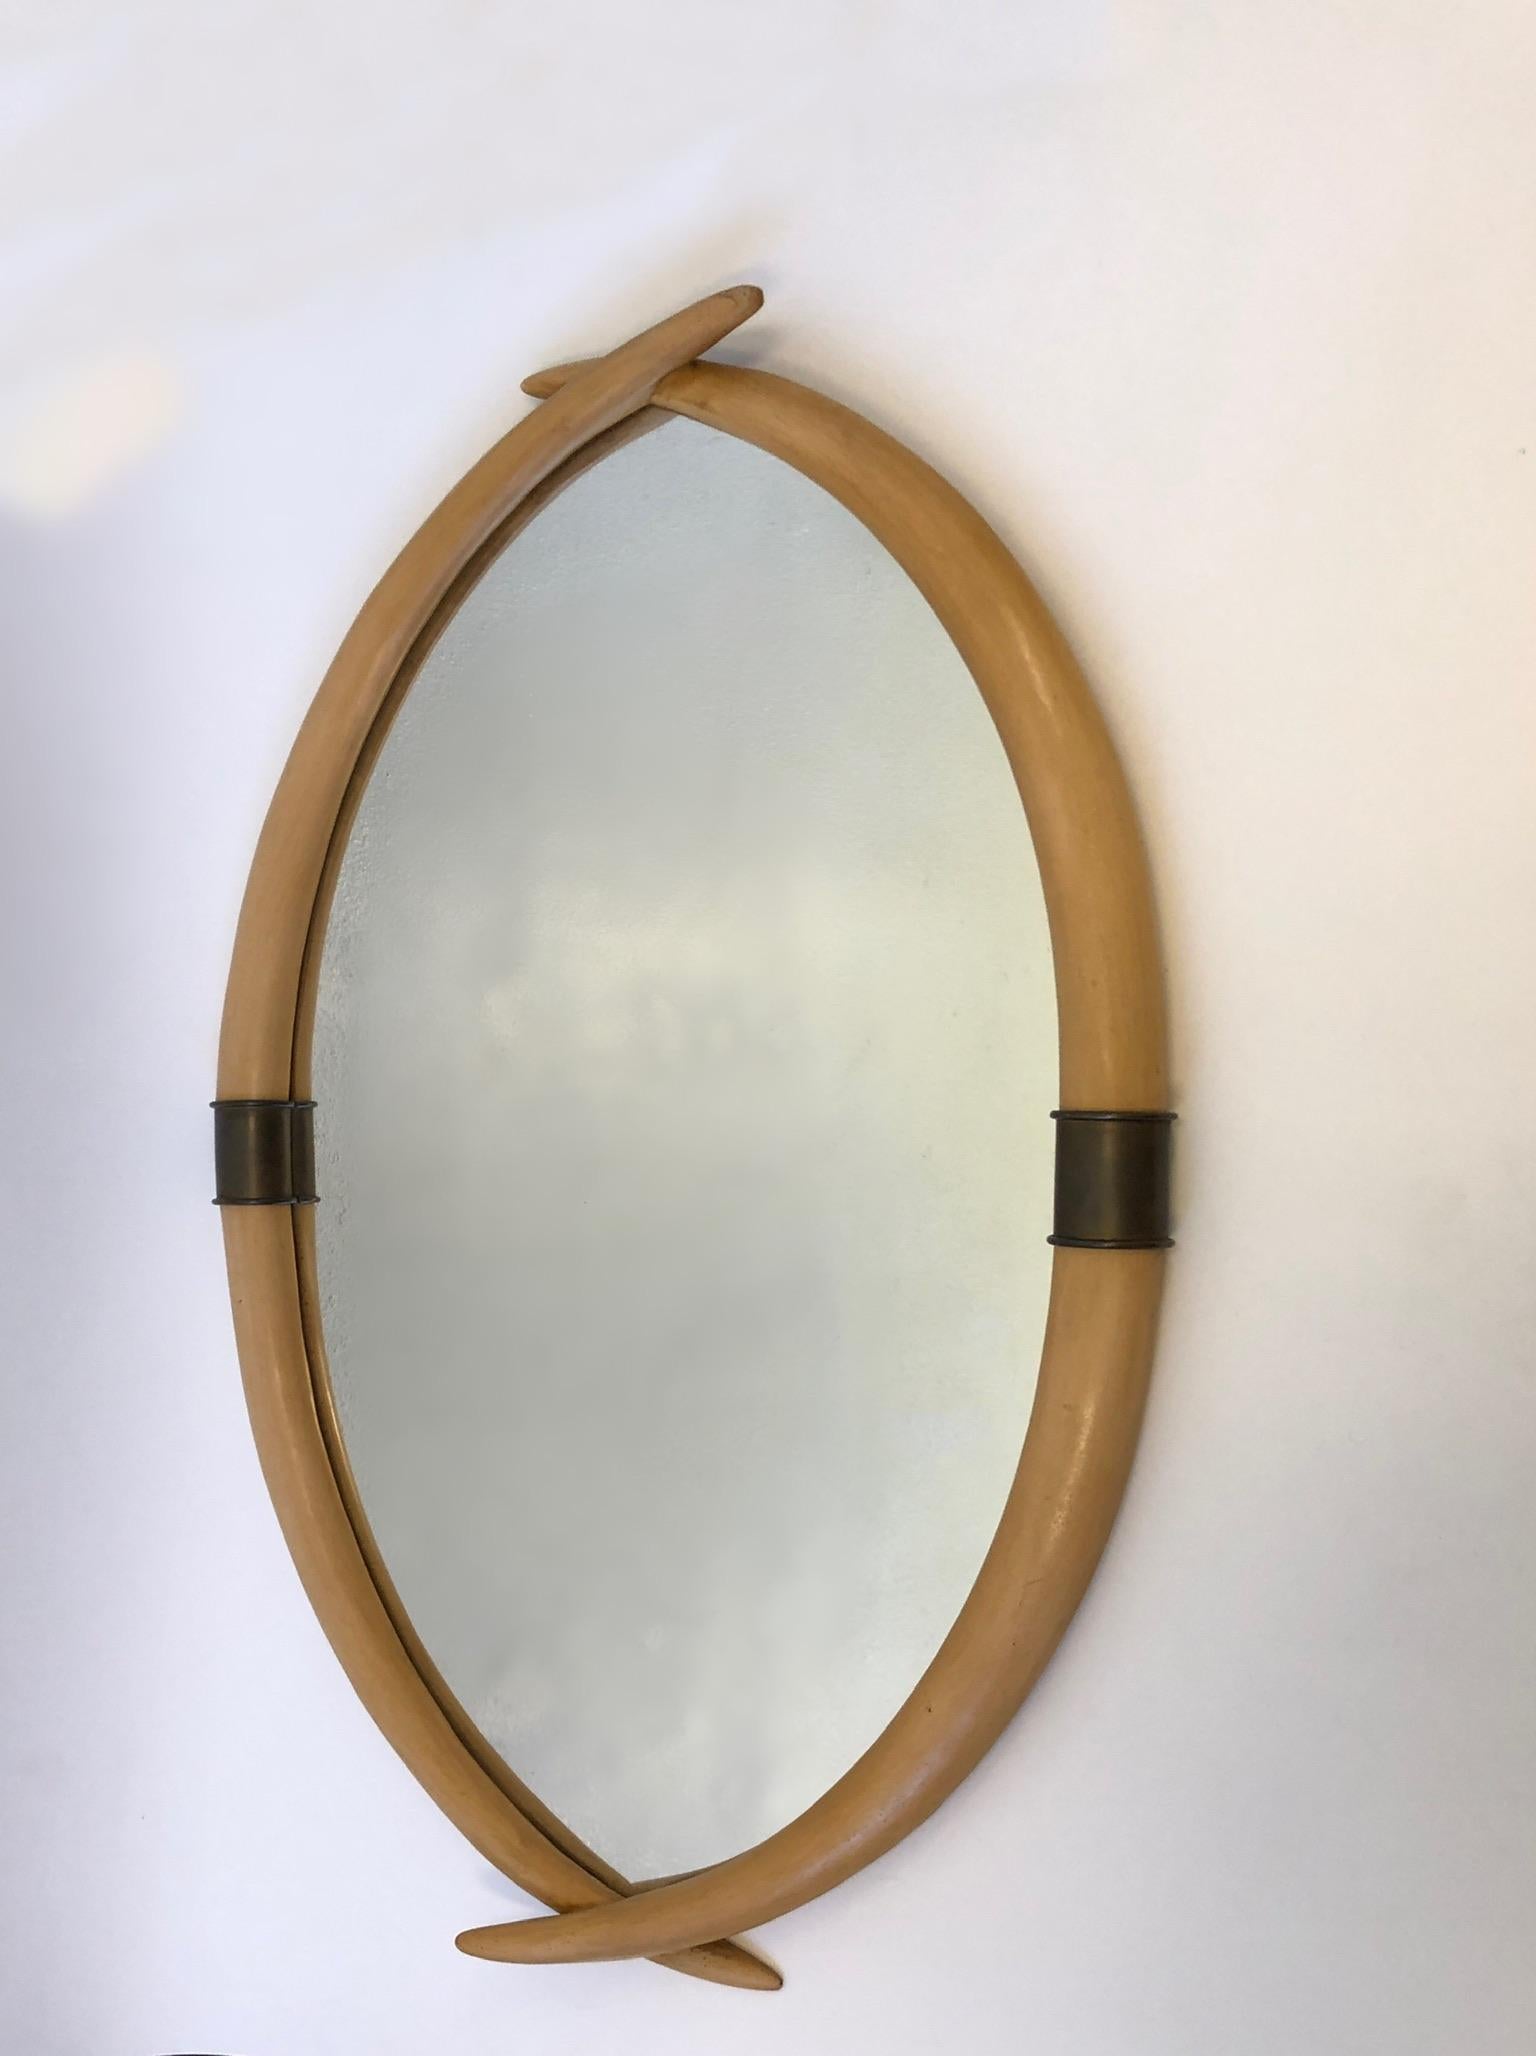 A glamorous 1976 faux tusk and aged brass mirror by Chapman.
The tusks are made out of a hard composite that’s painted off-white. With some aged brass detail.
Dimensions: 29” wide 43” high 3” deep.